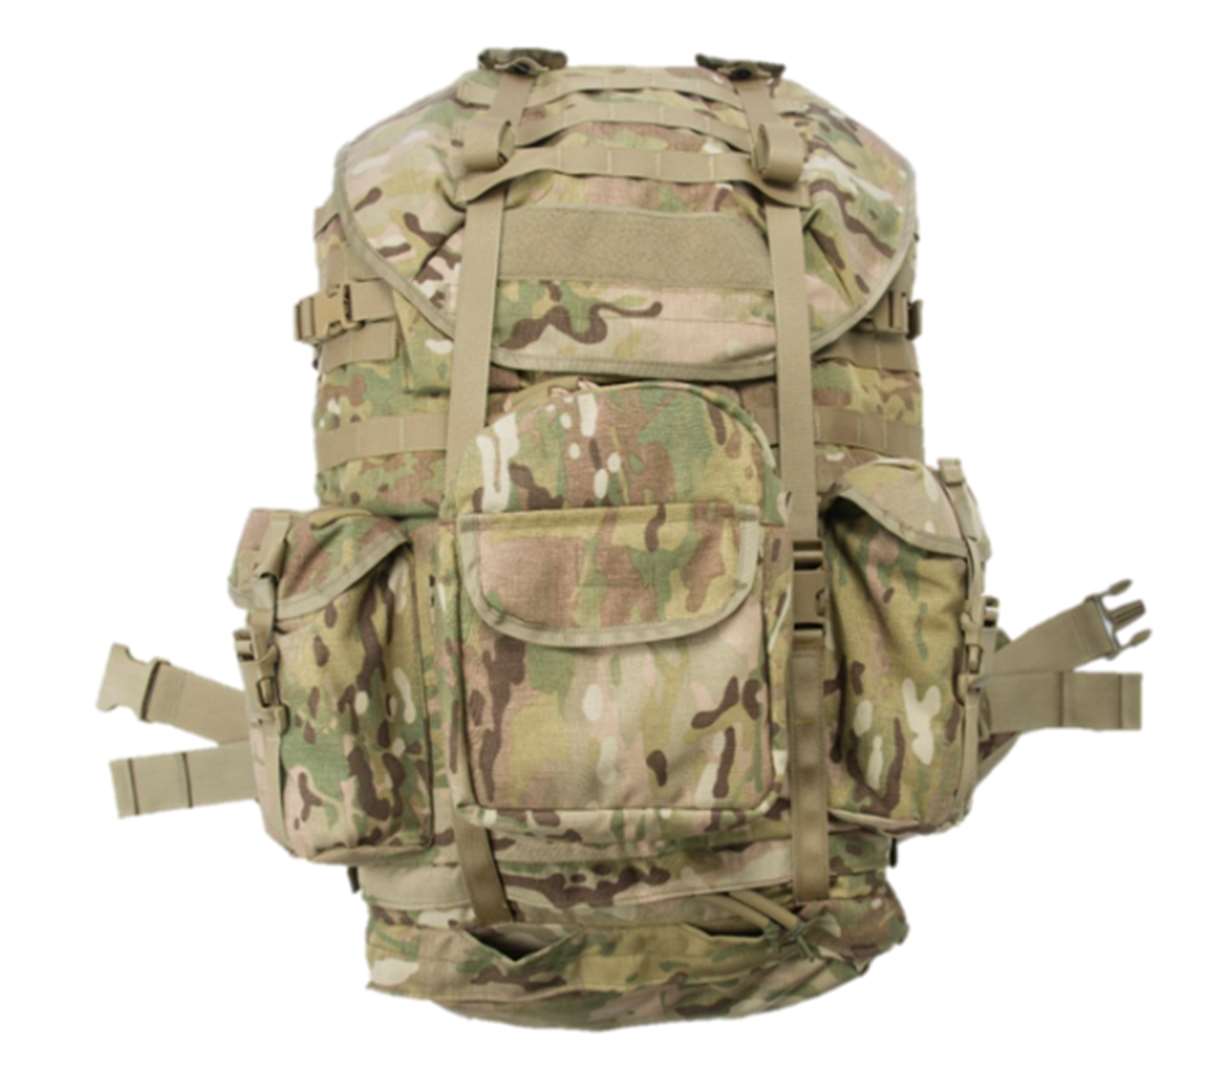 MOLLE 4000 rucksack - front